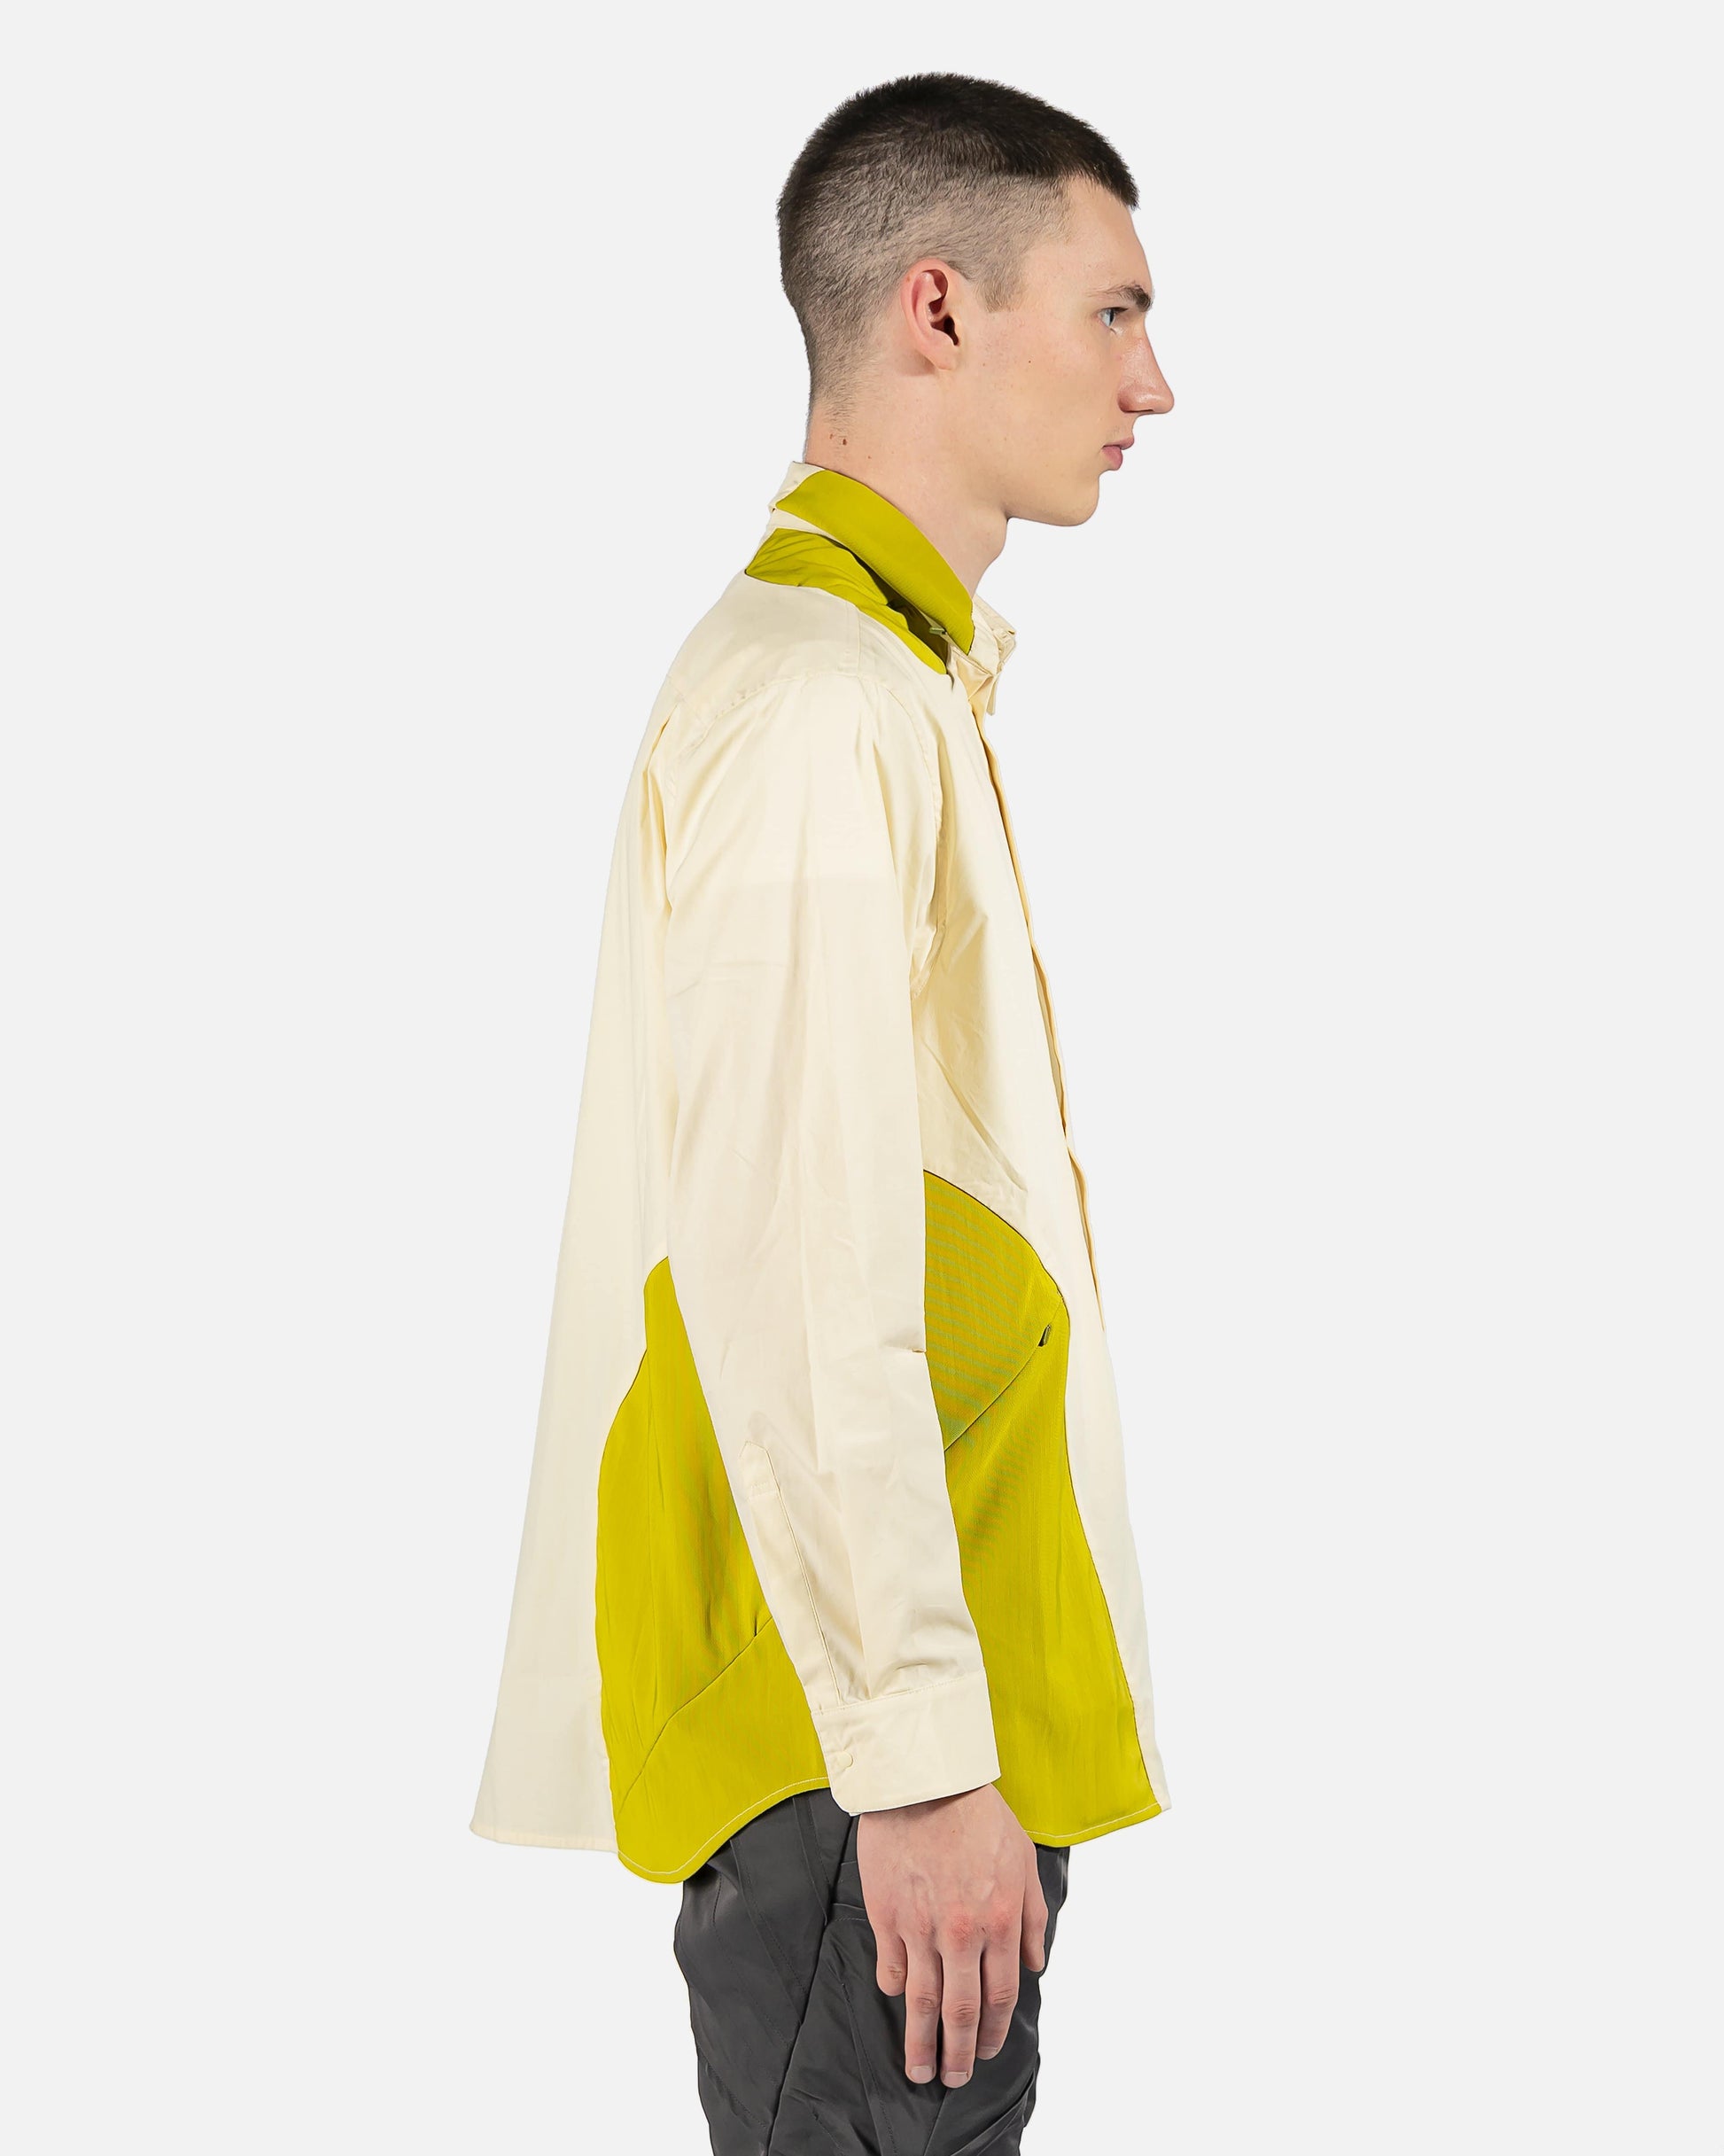 POST ARCHIVE FACTION (P.A.F) Men's Shirts 4.0+ Shirt Center in Light Yellow